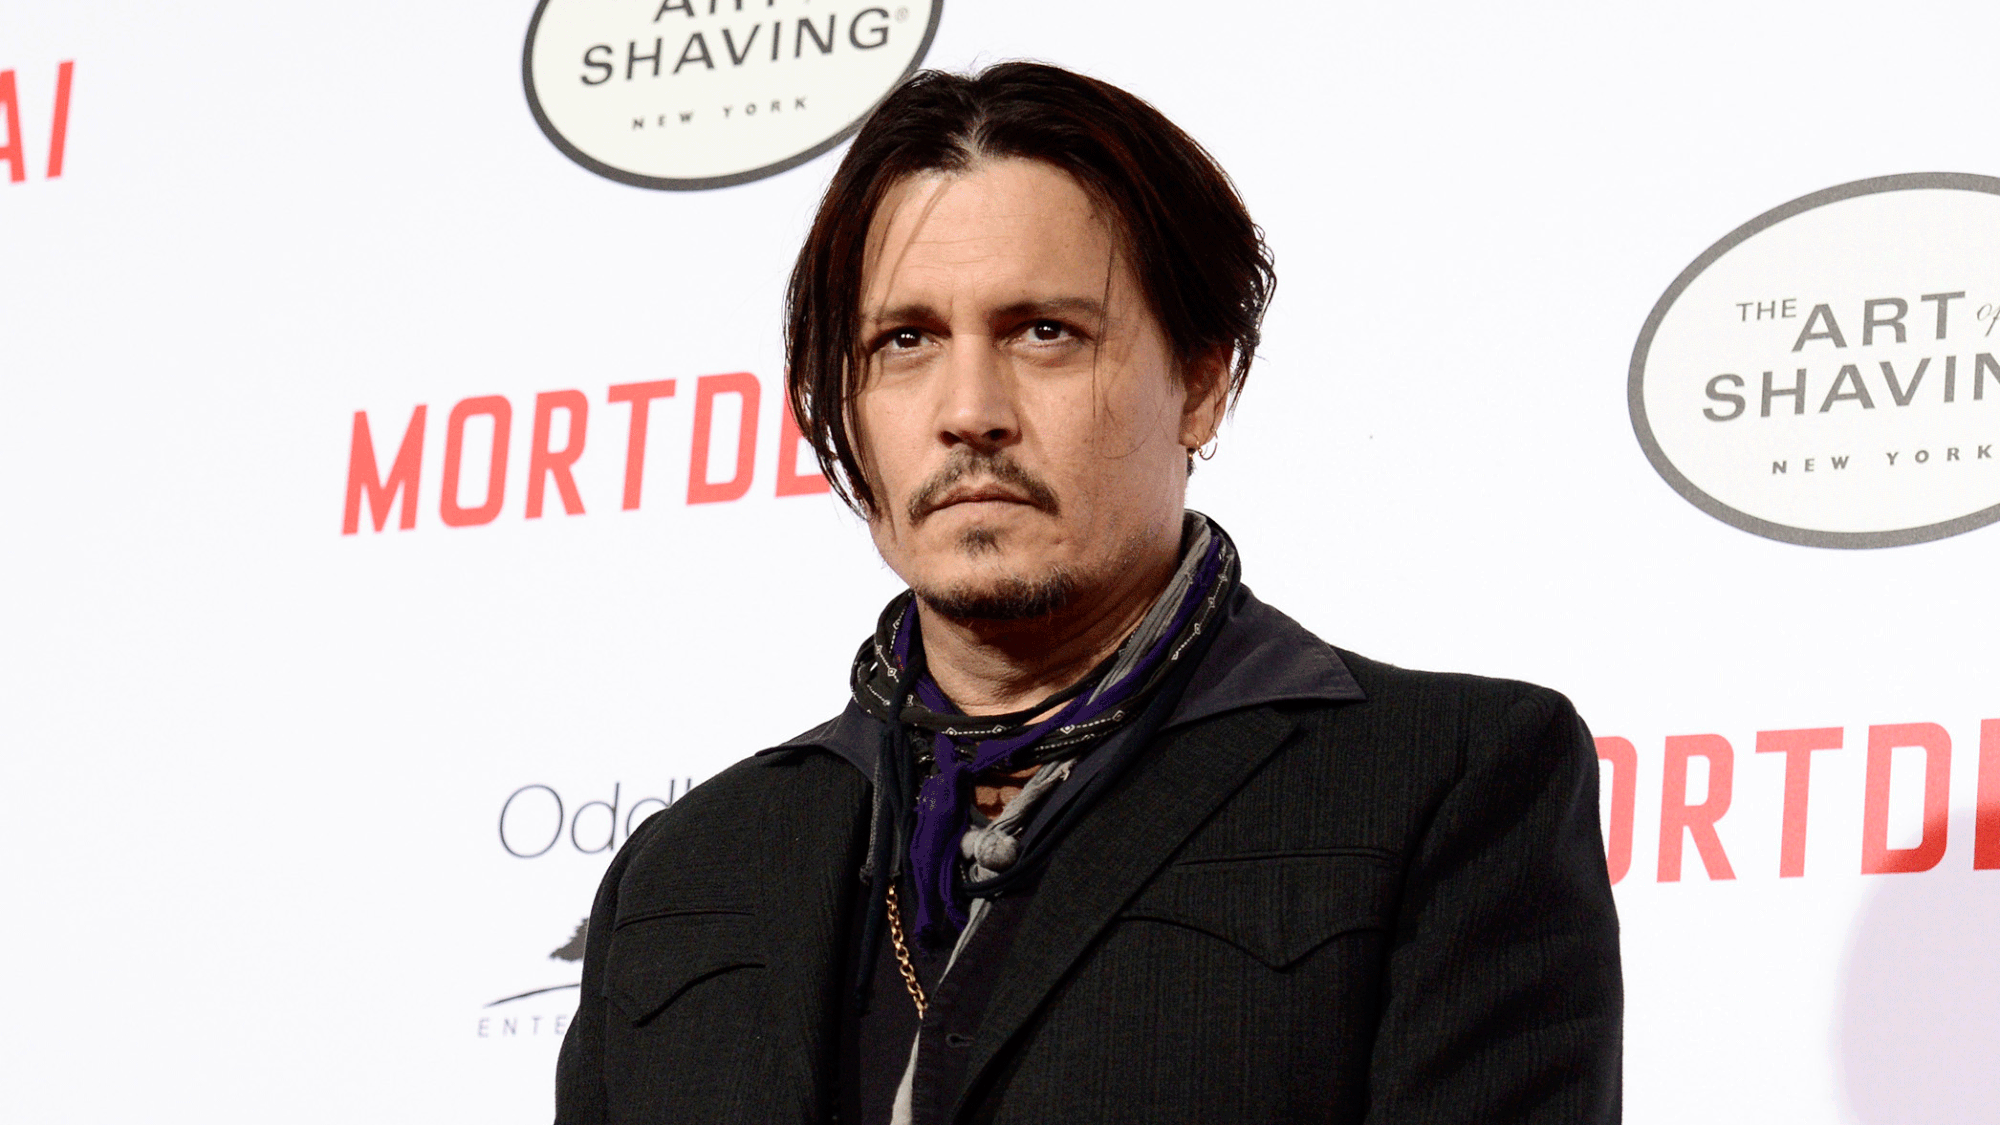 Actor Johnny Depp at the premiere of the feature film <i>Mortdecai</i> in Los Angeles. (Photo: AP)